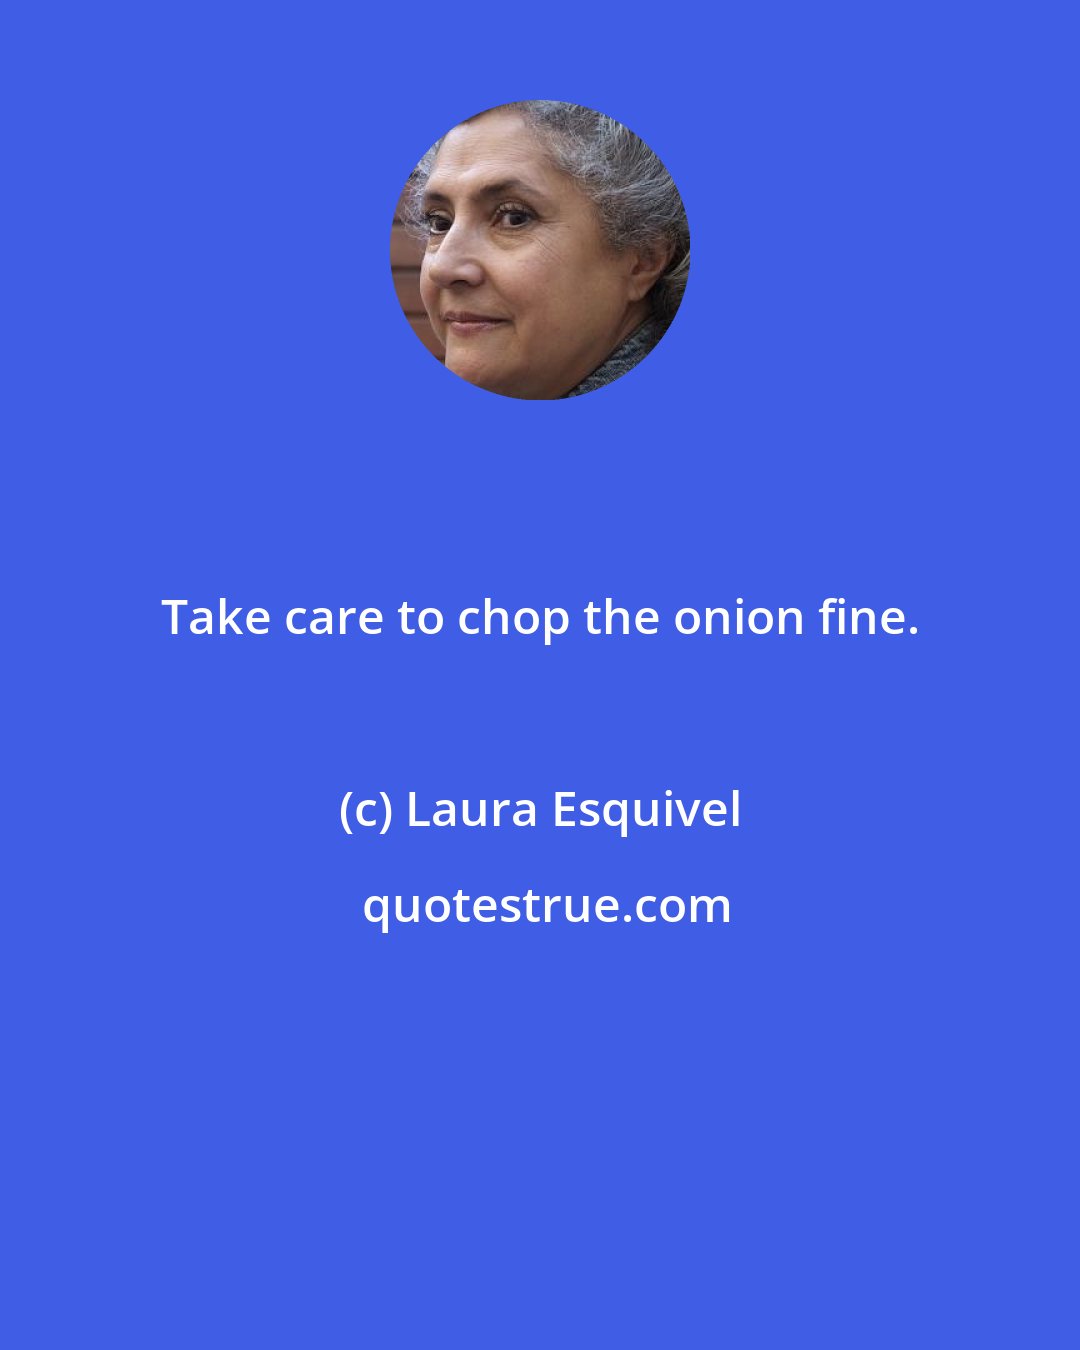 Laura Esquivel: Take care to chop the onion fine.